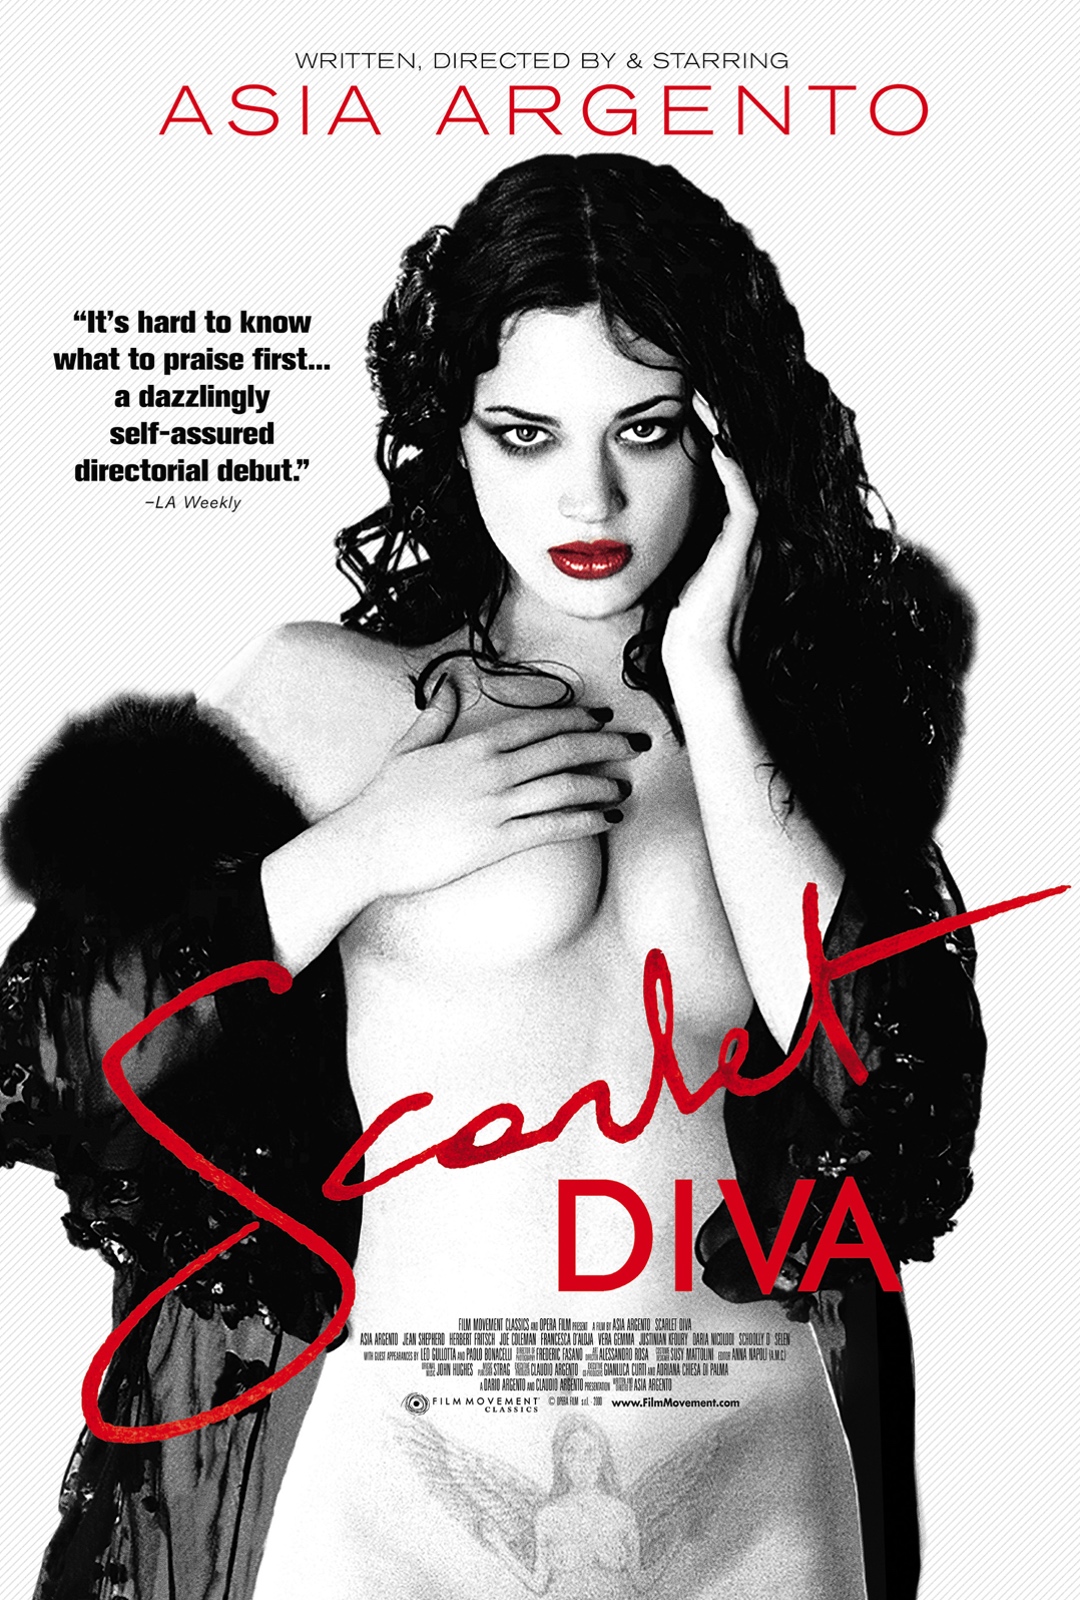 Scarlet Diva (2000) with English Subtitles on DVD on DVD